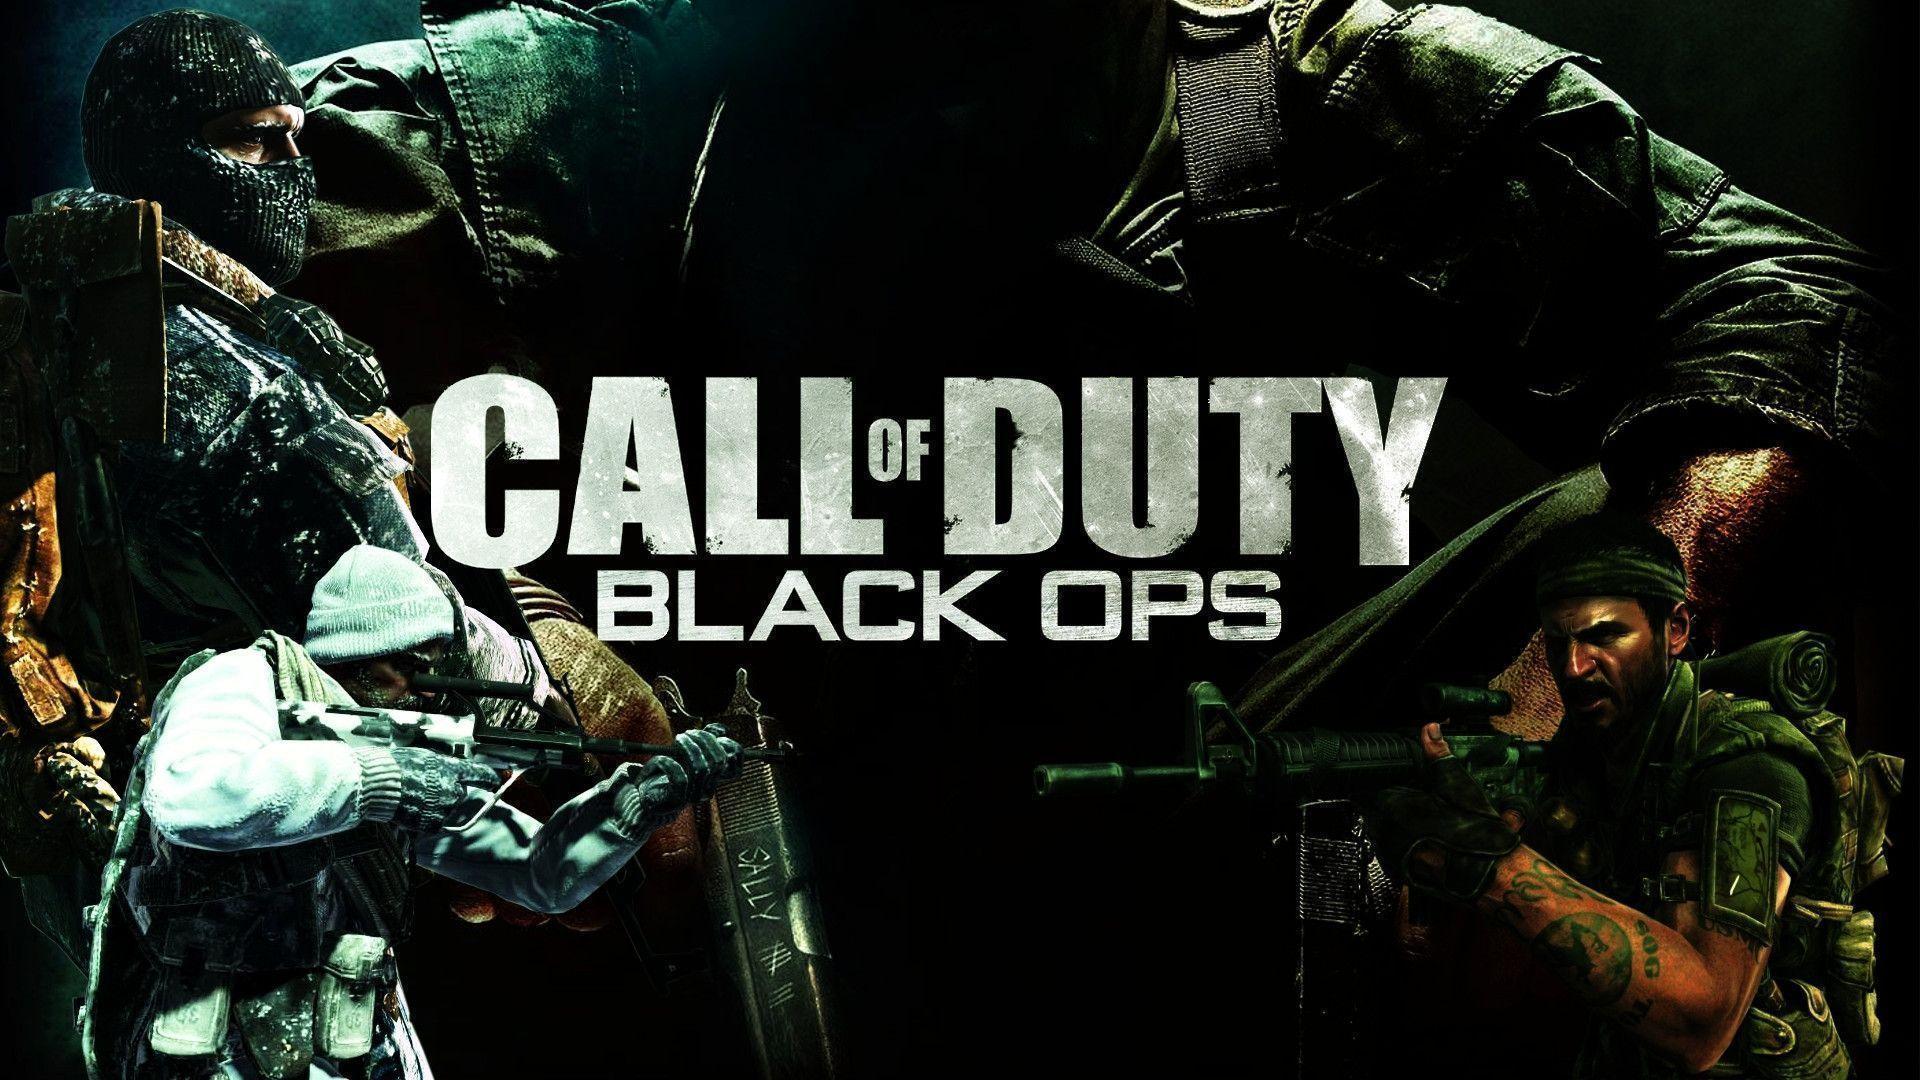 Call of Duty: Black Ops. PC Games Archive